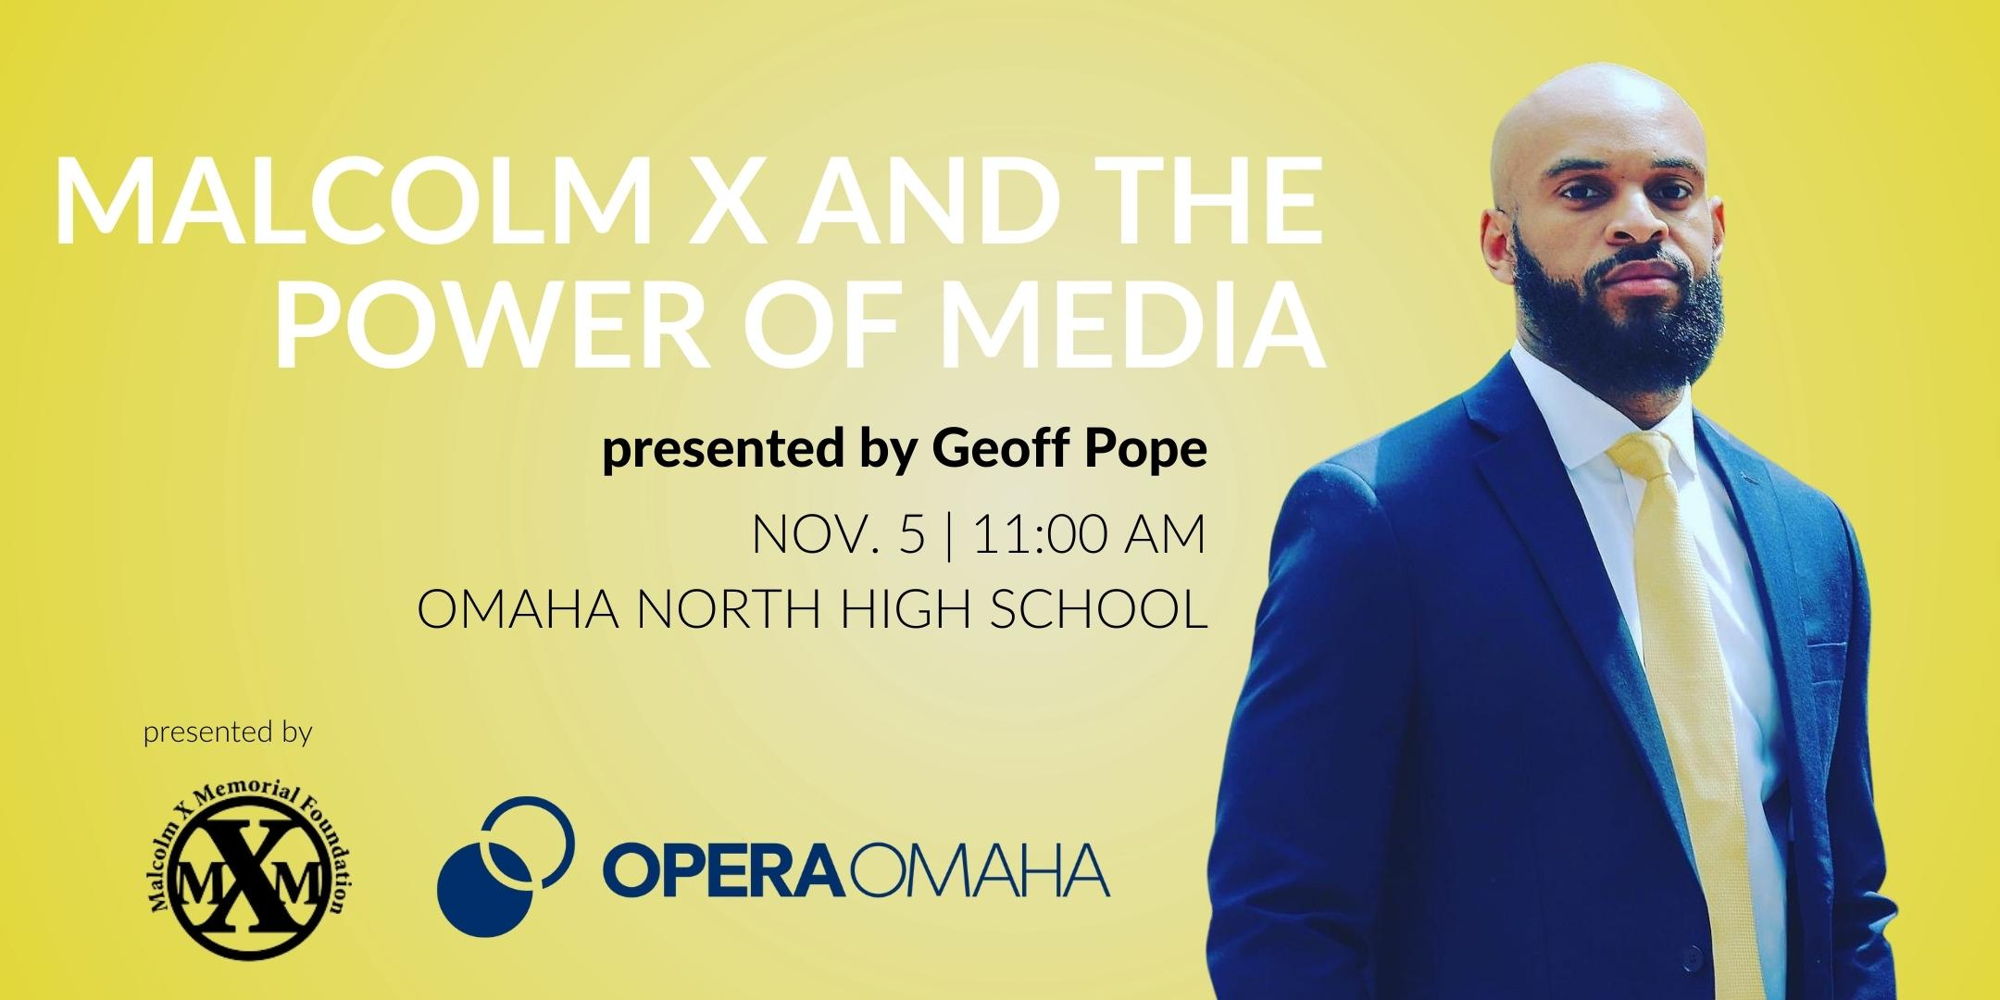 Malcom X and the Power of Media | Geoff Pope promotional image